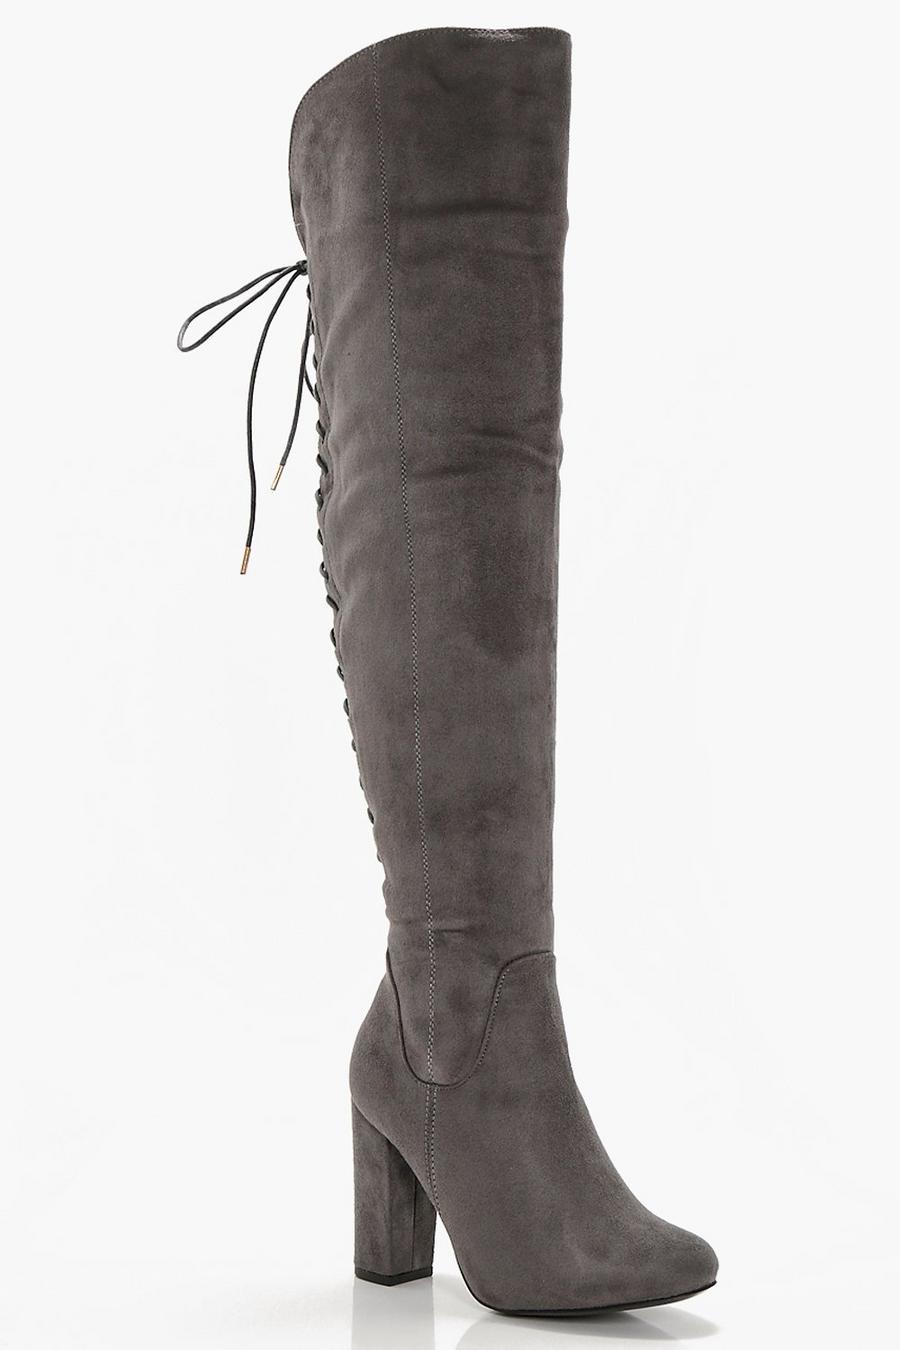 Grey Lace Back Block Heel Over The Knee High Boots image number 1